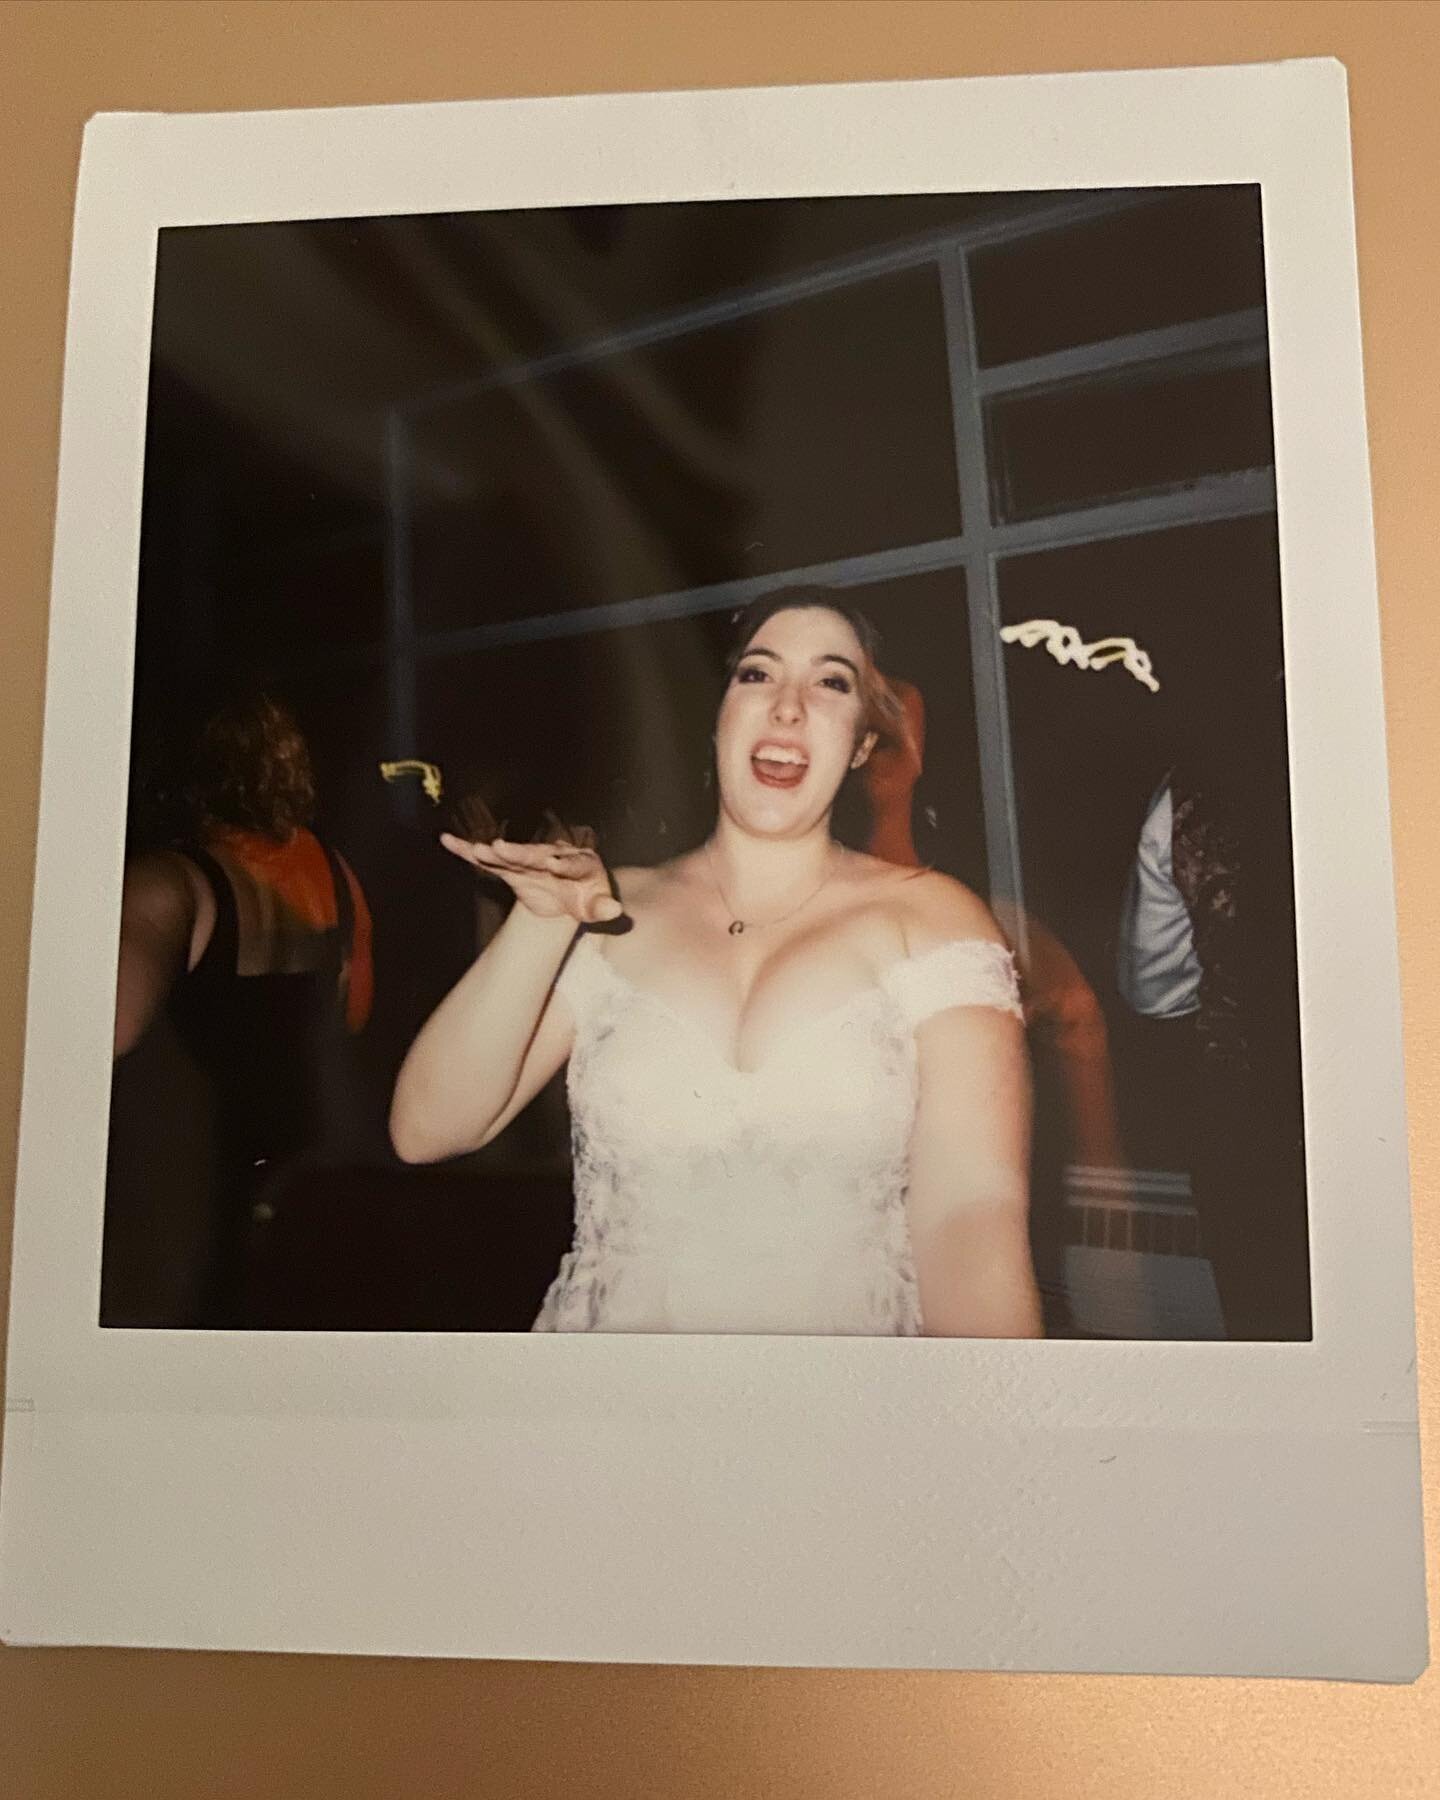 A few more Polaroids from the wedding&hellip;.I swear I will post about something else soon but there are some gems in here 🥰